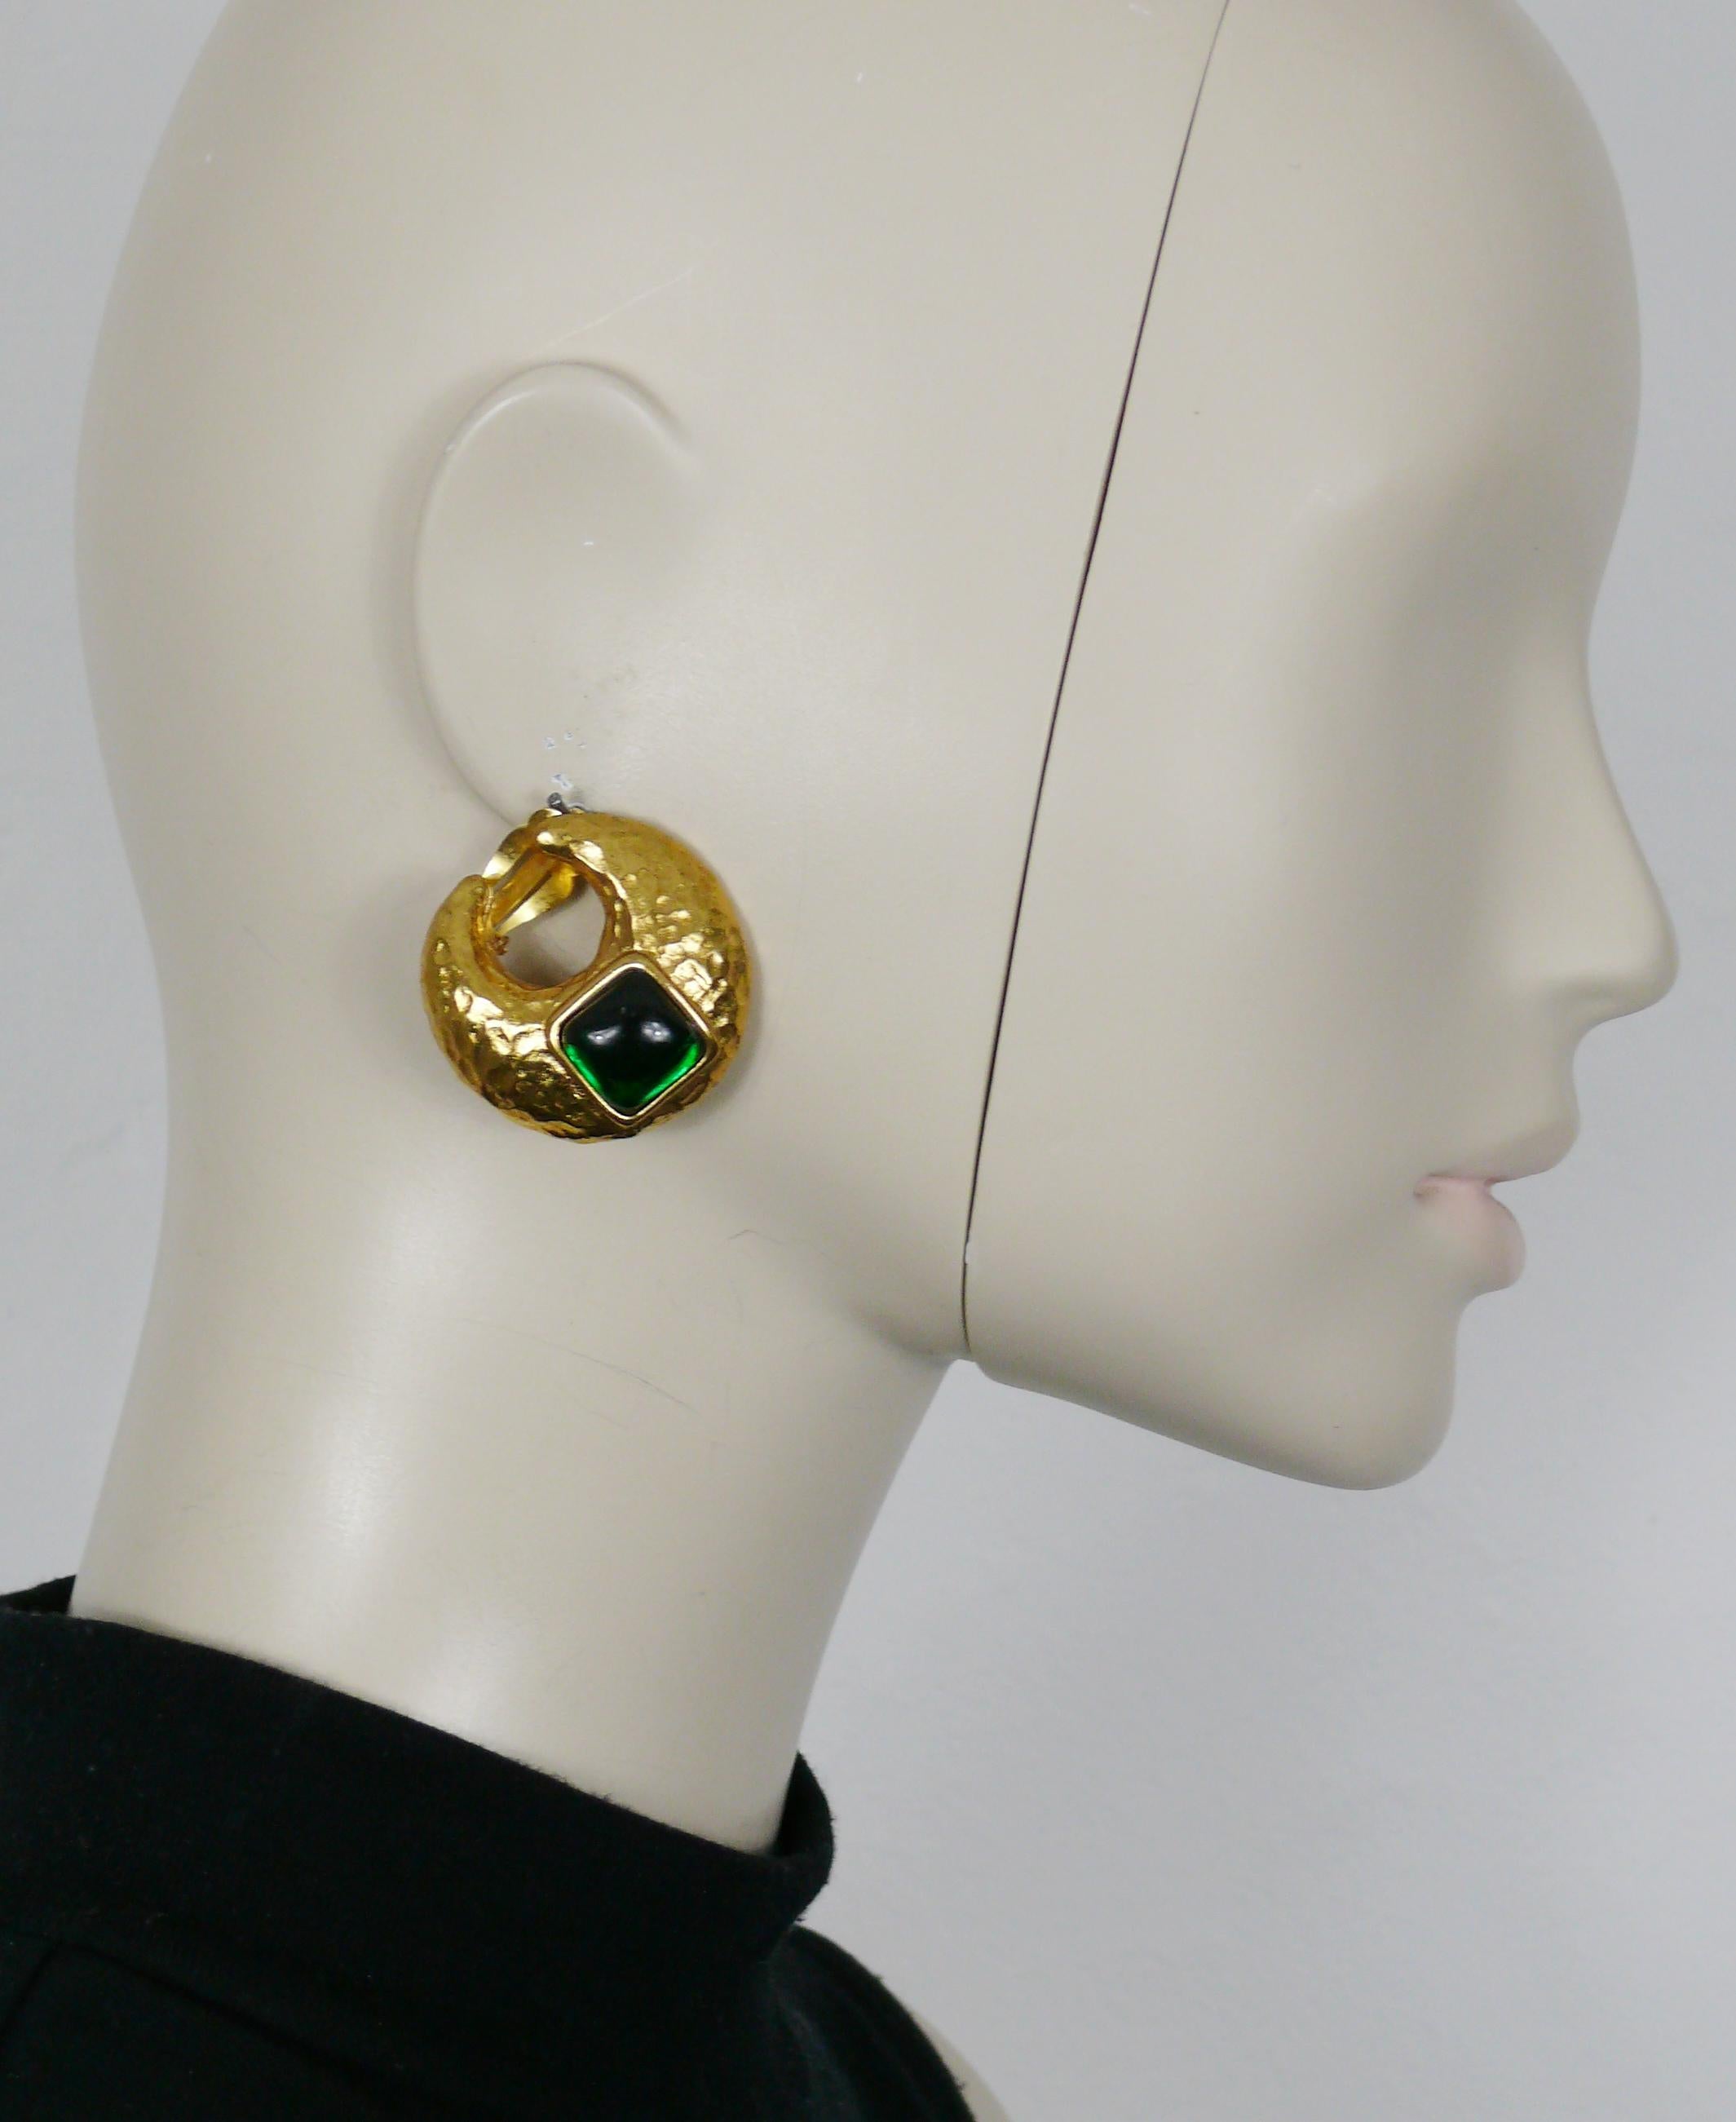 YVES SAINT LAURENT vintage hammered gold tone crescent shape clip-on earrings embellished with a green resin cabochon.

Embossed YSL Made in France.

Indicative measurements : height approx. 3.5 cm (1.38 inches) / max. width approx. 3.5 cm (1.38